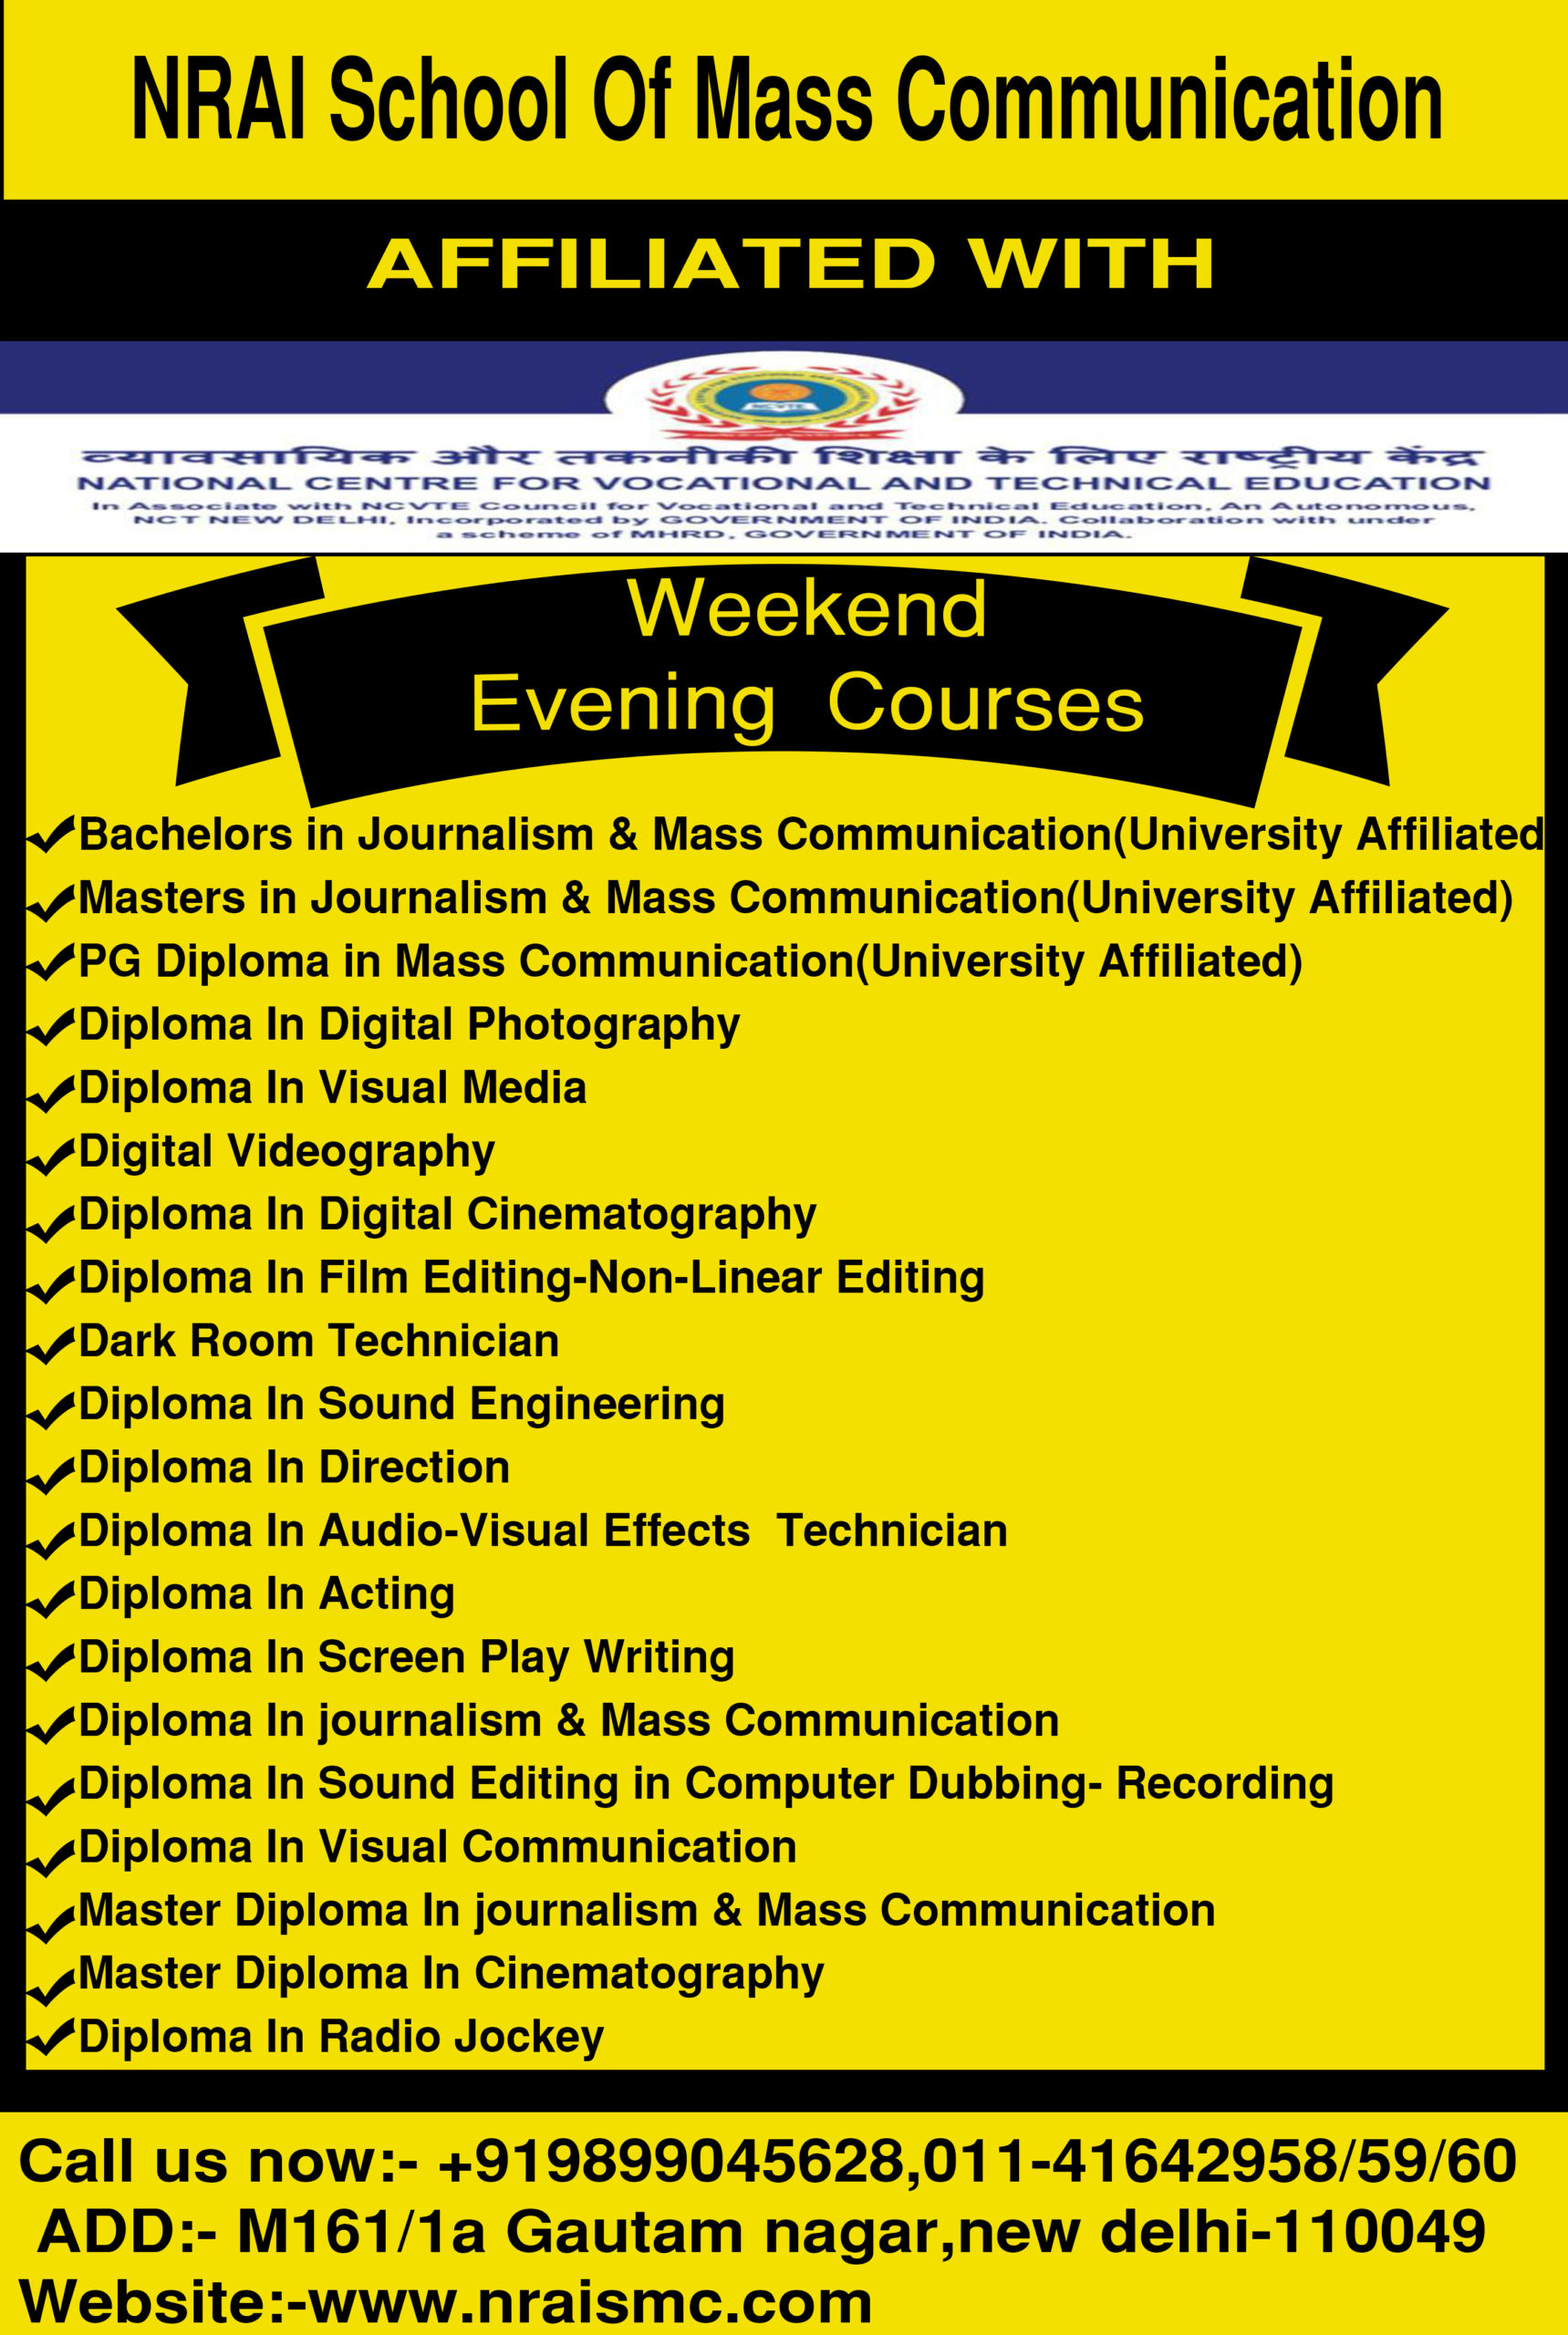 Weekand courses in Media